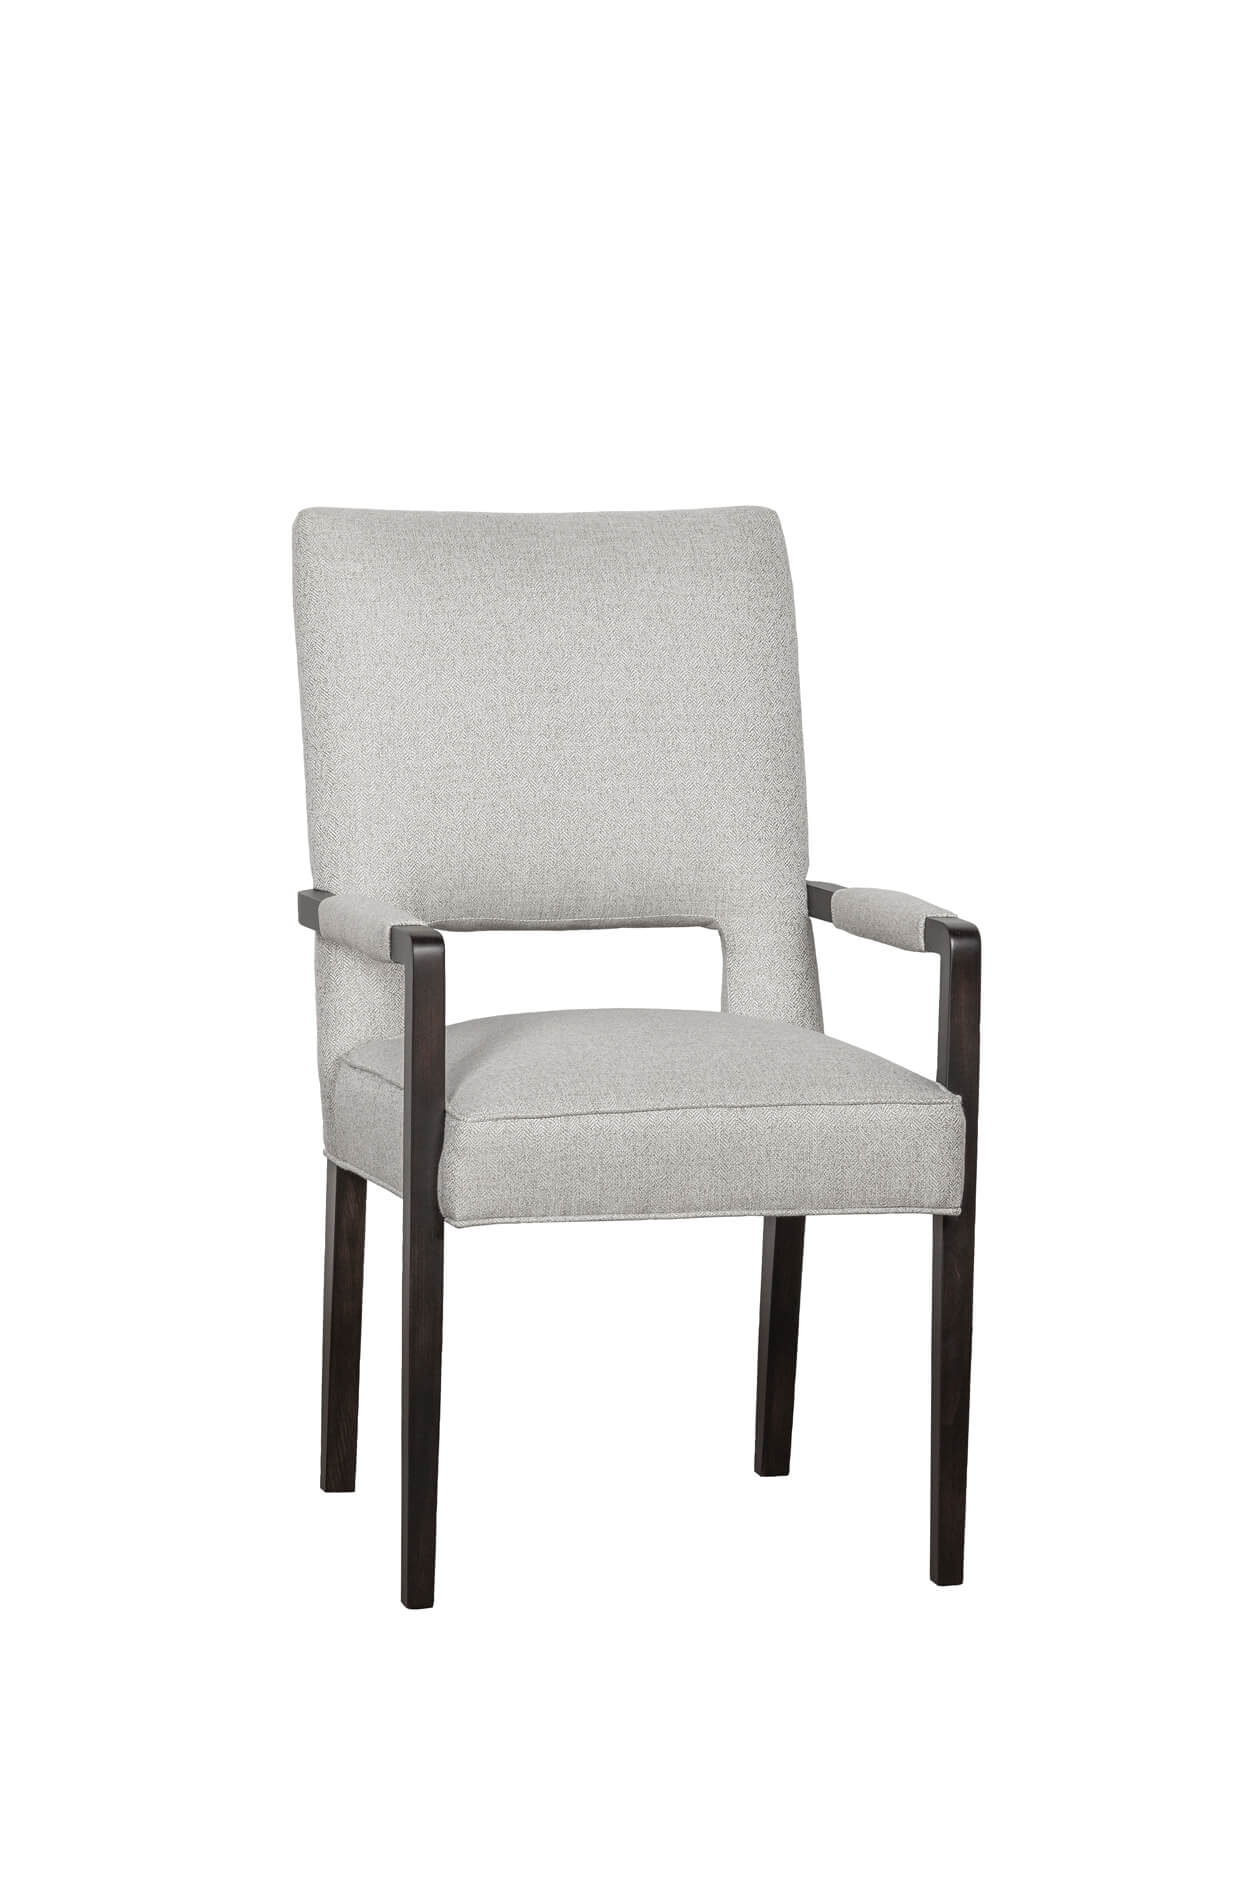 Thompson Upholstered Dining Chair